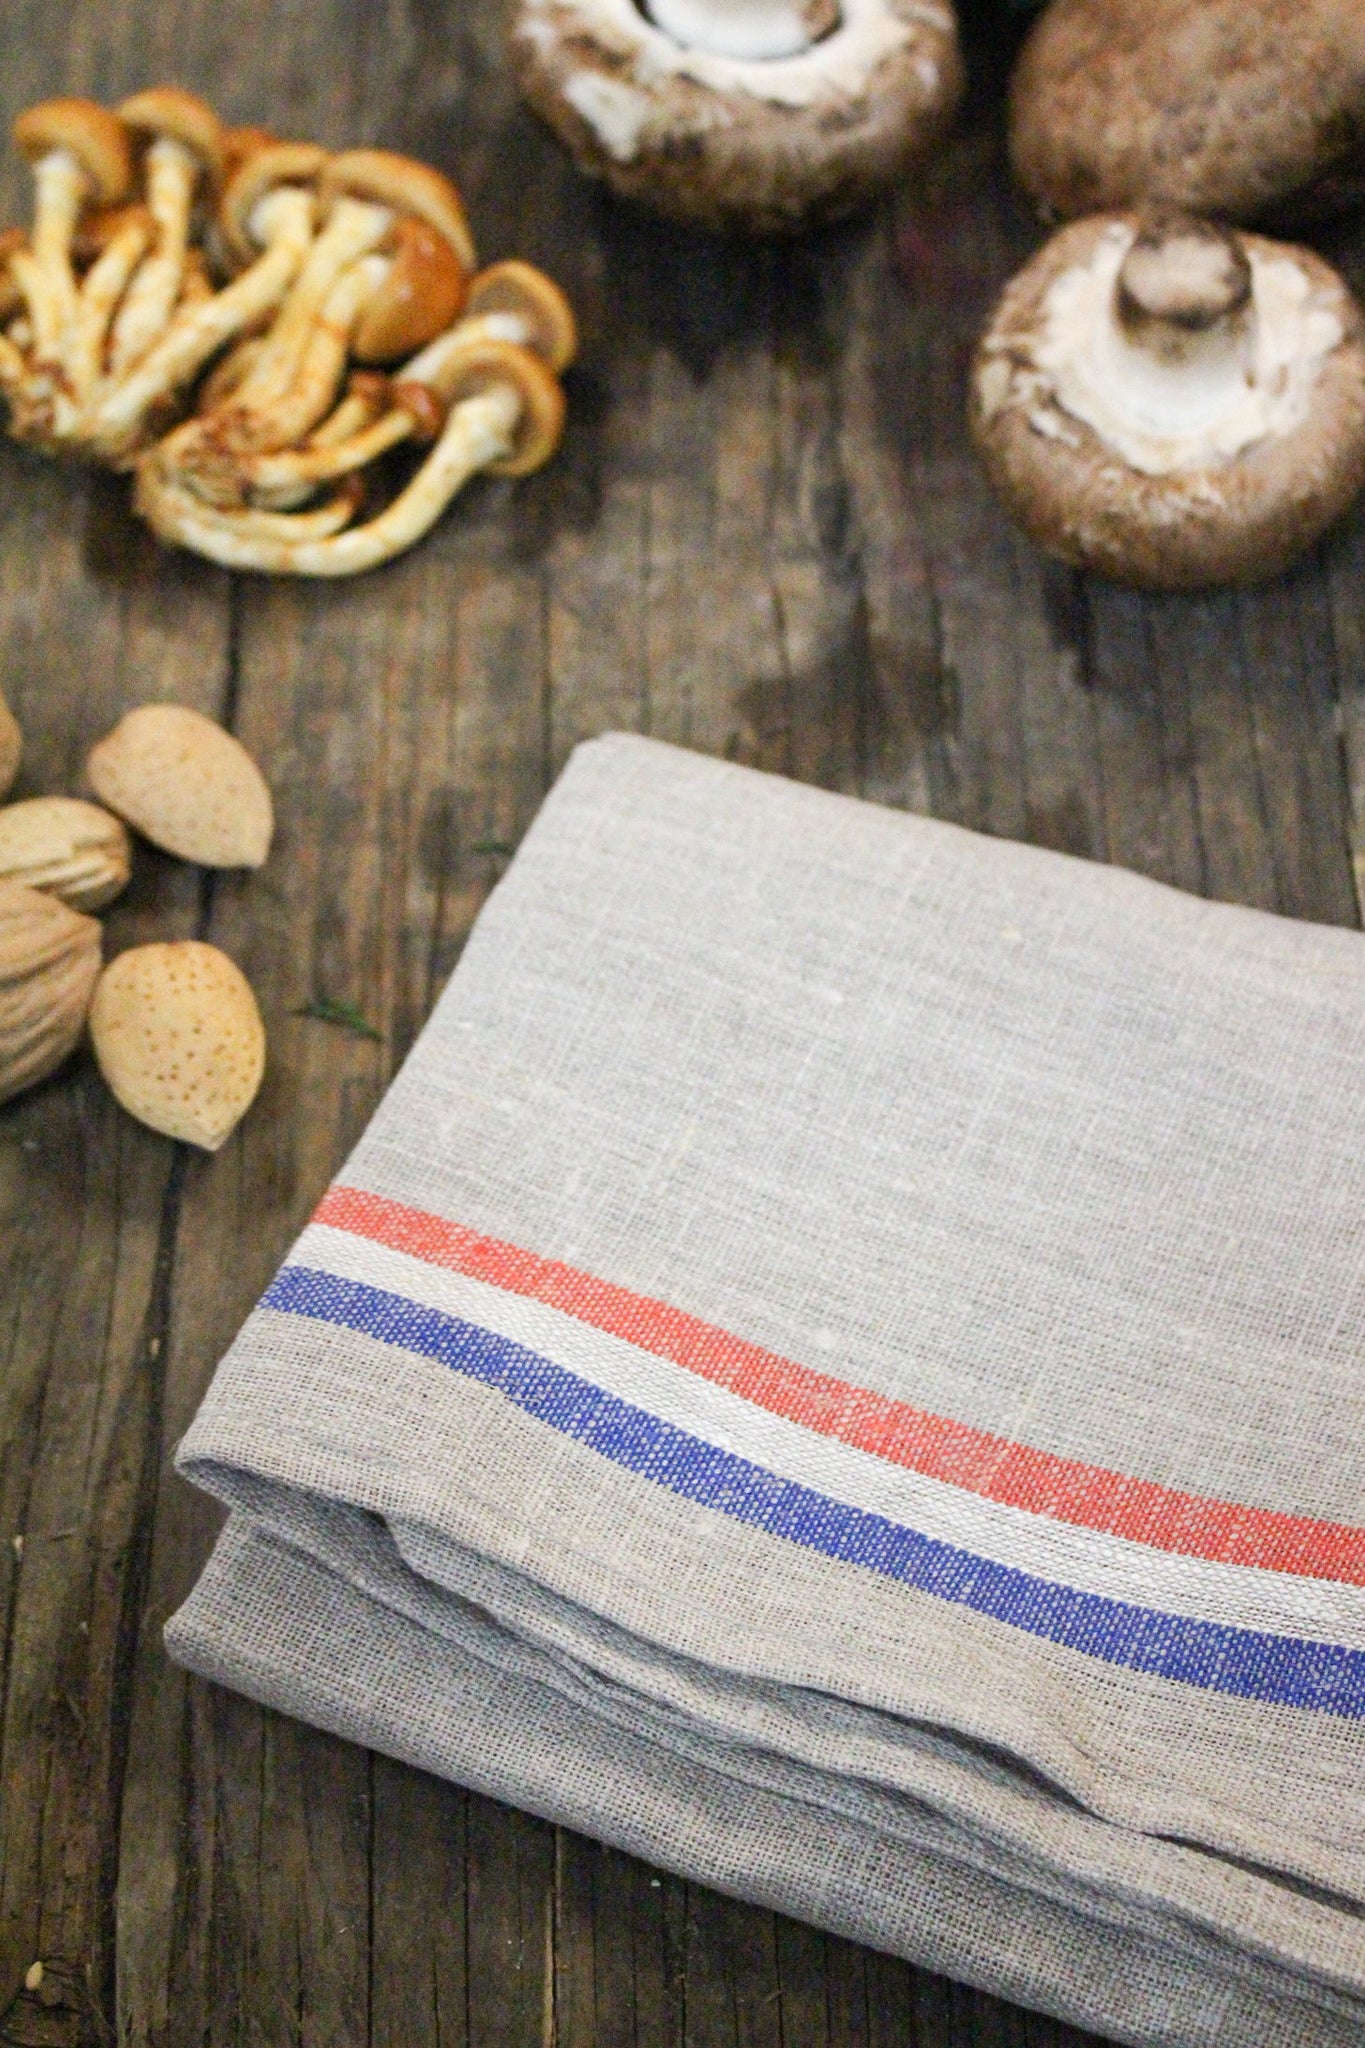 Dish Towel, Blue Check with Red Stripe – Chinaberry Tree Linens